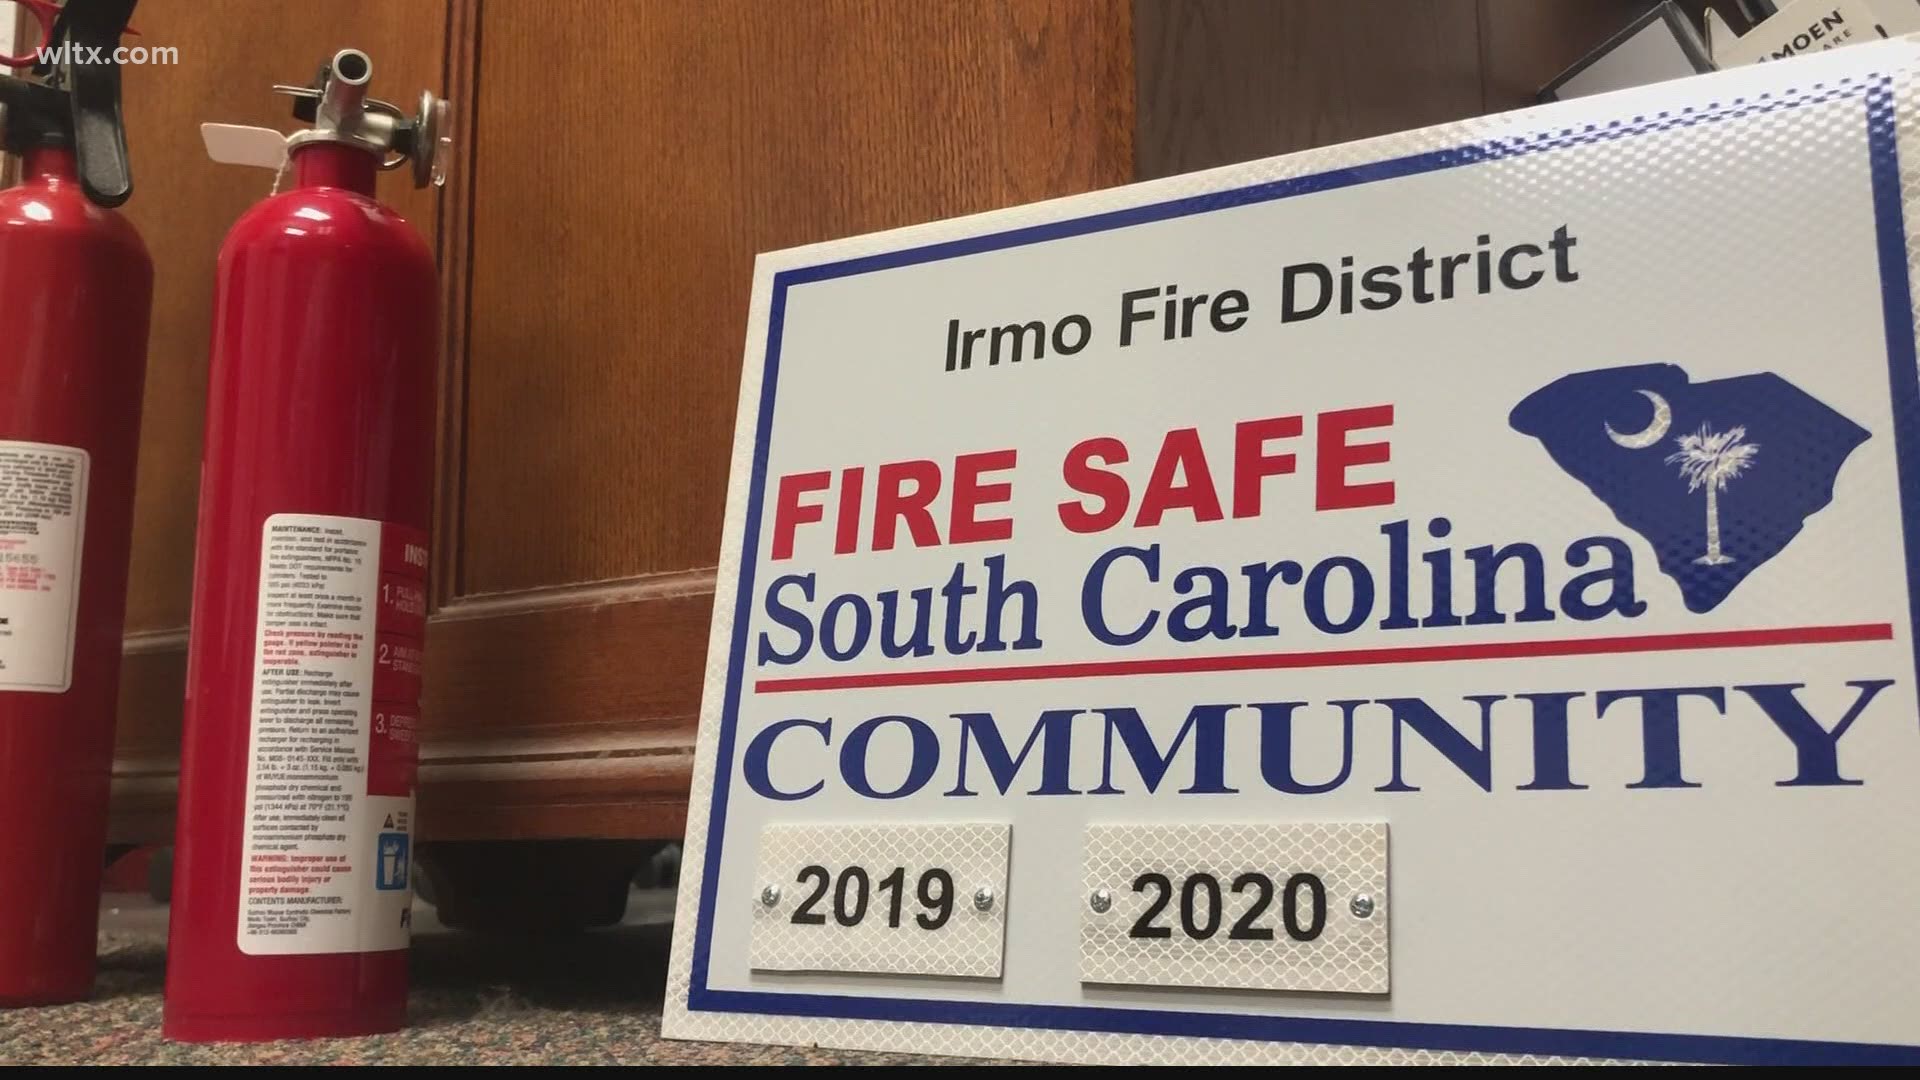 The Irmo Fire District has been named a 'Fire Safe Community' by the South Carolina State Fire Marshal's office.